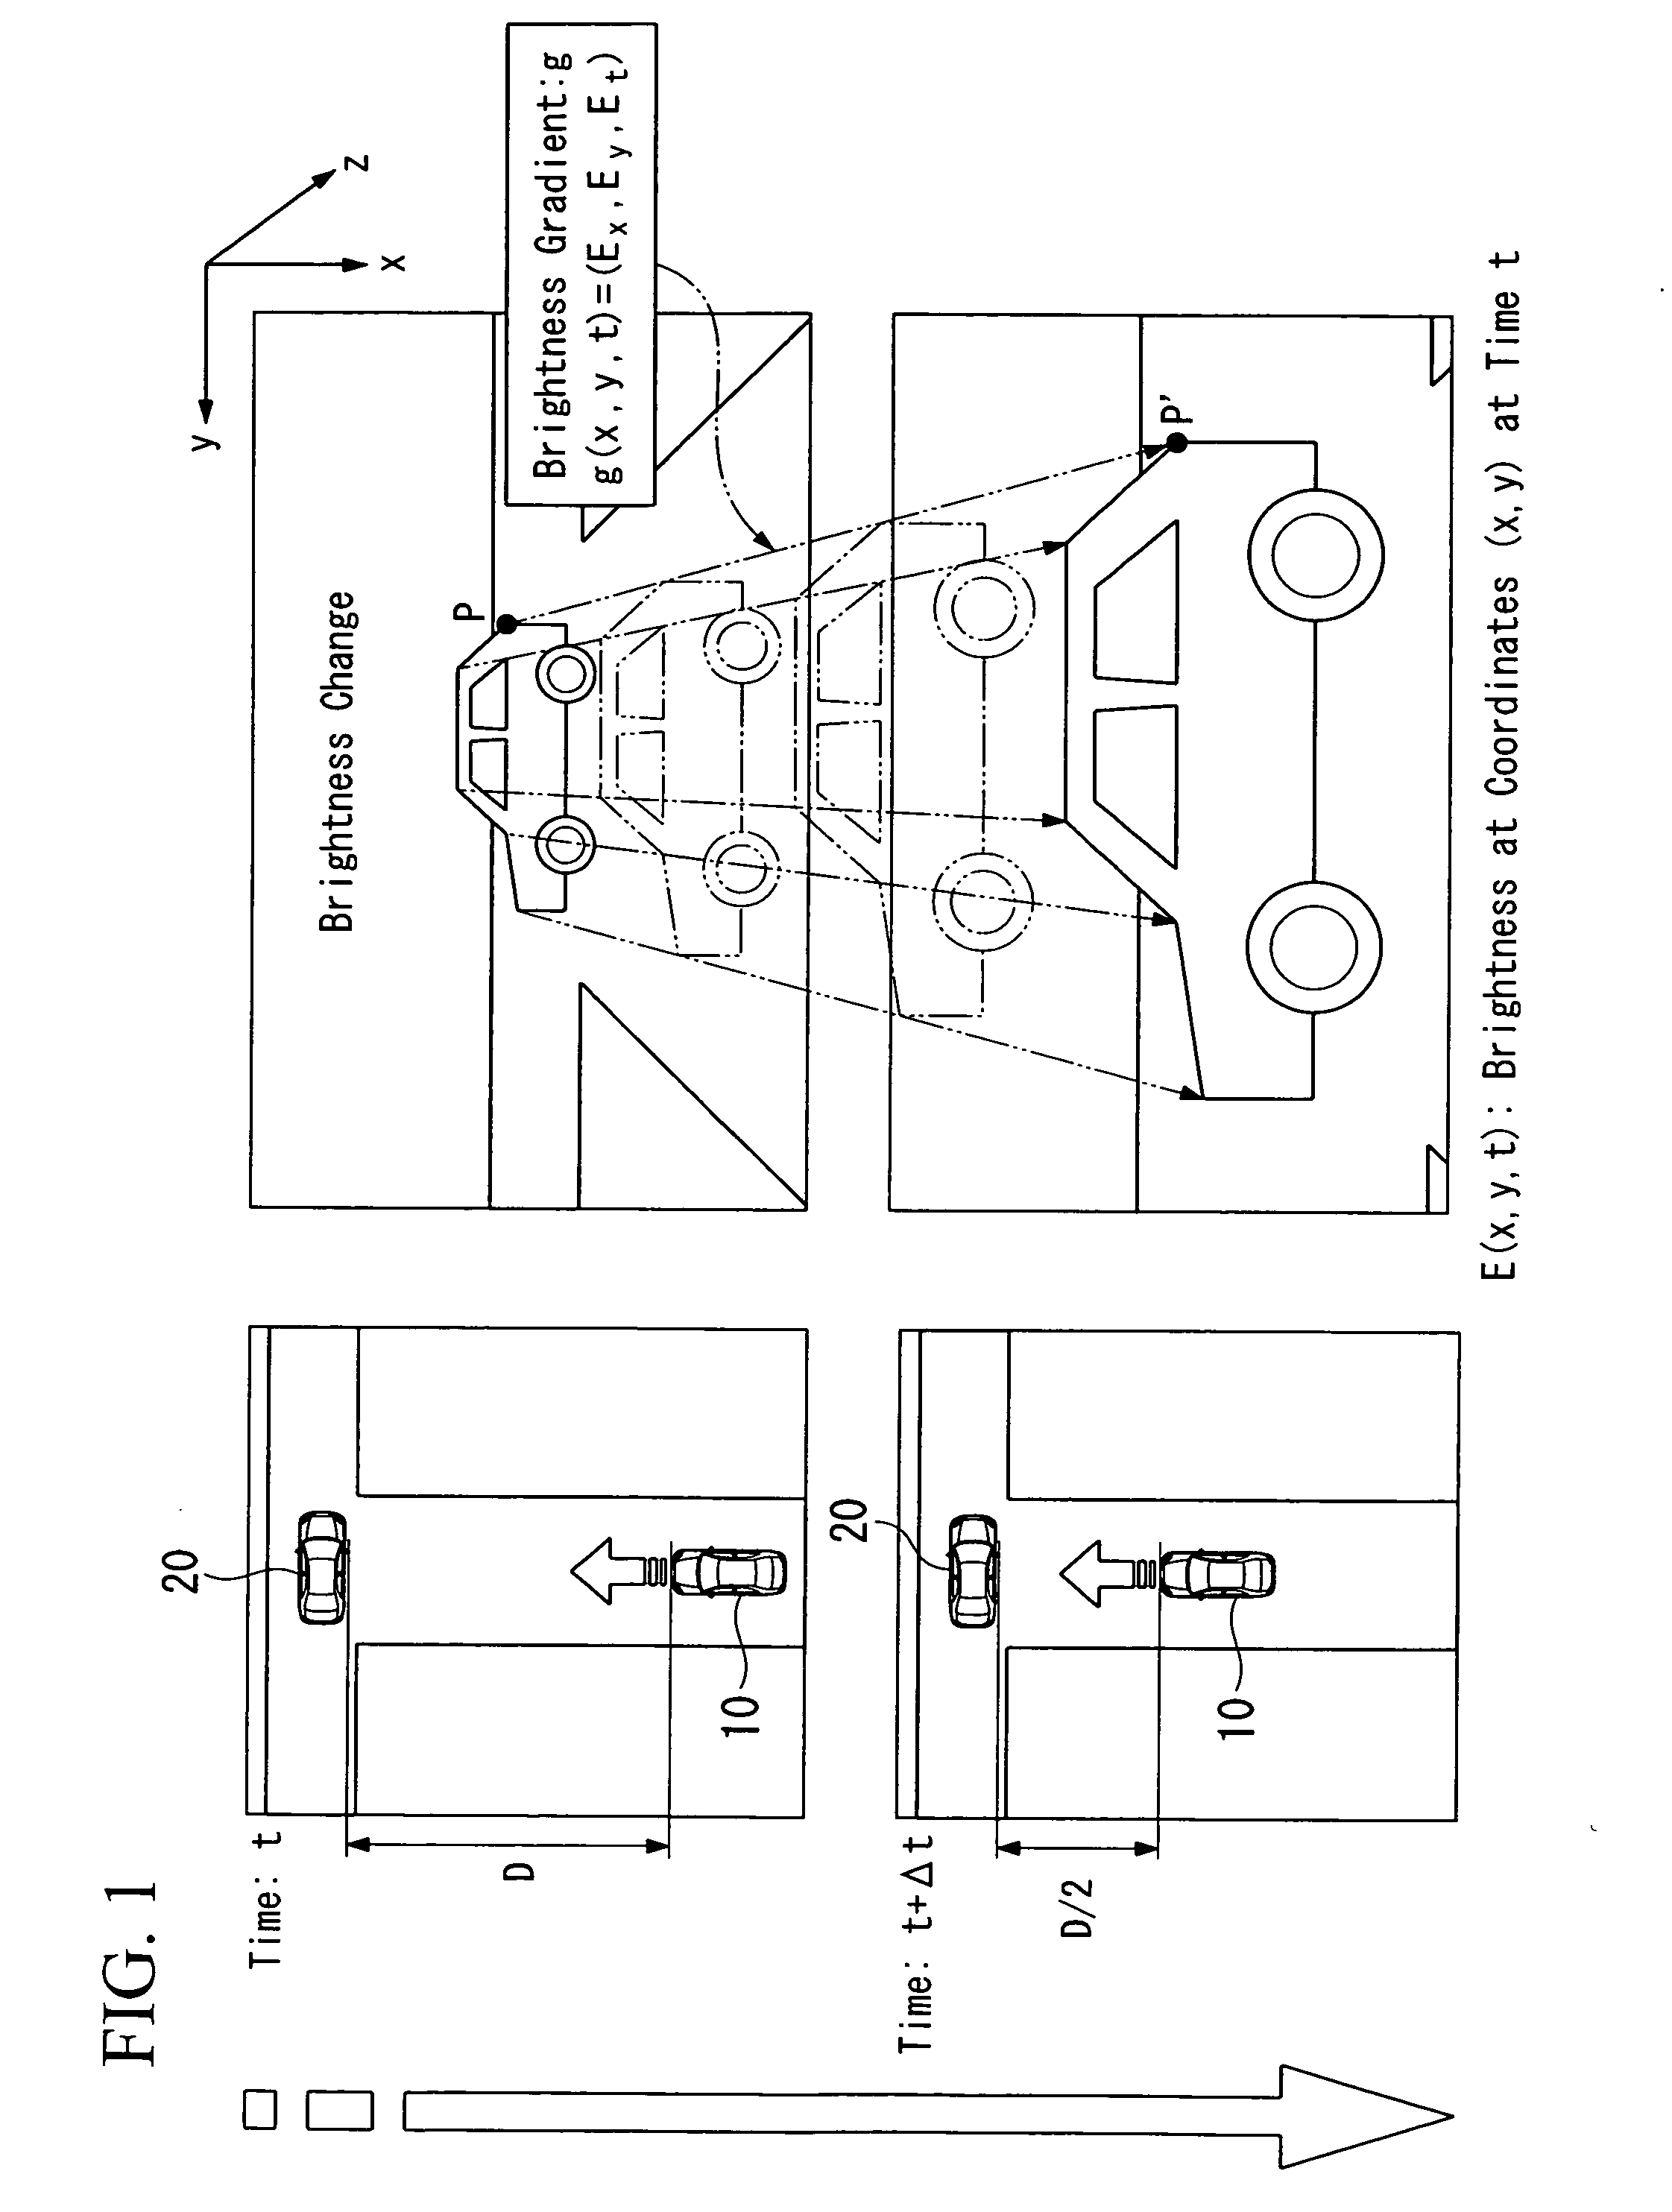 Time-to-contact estimation device and method for estimating time to contact